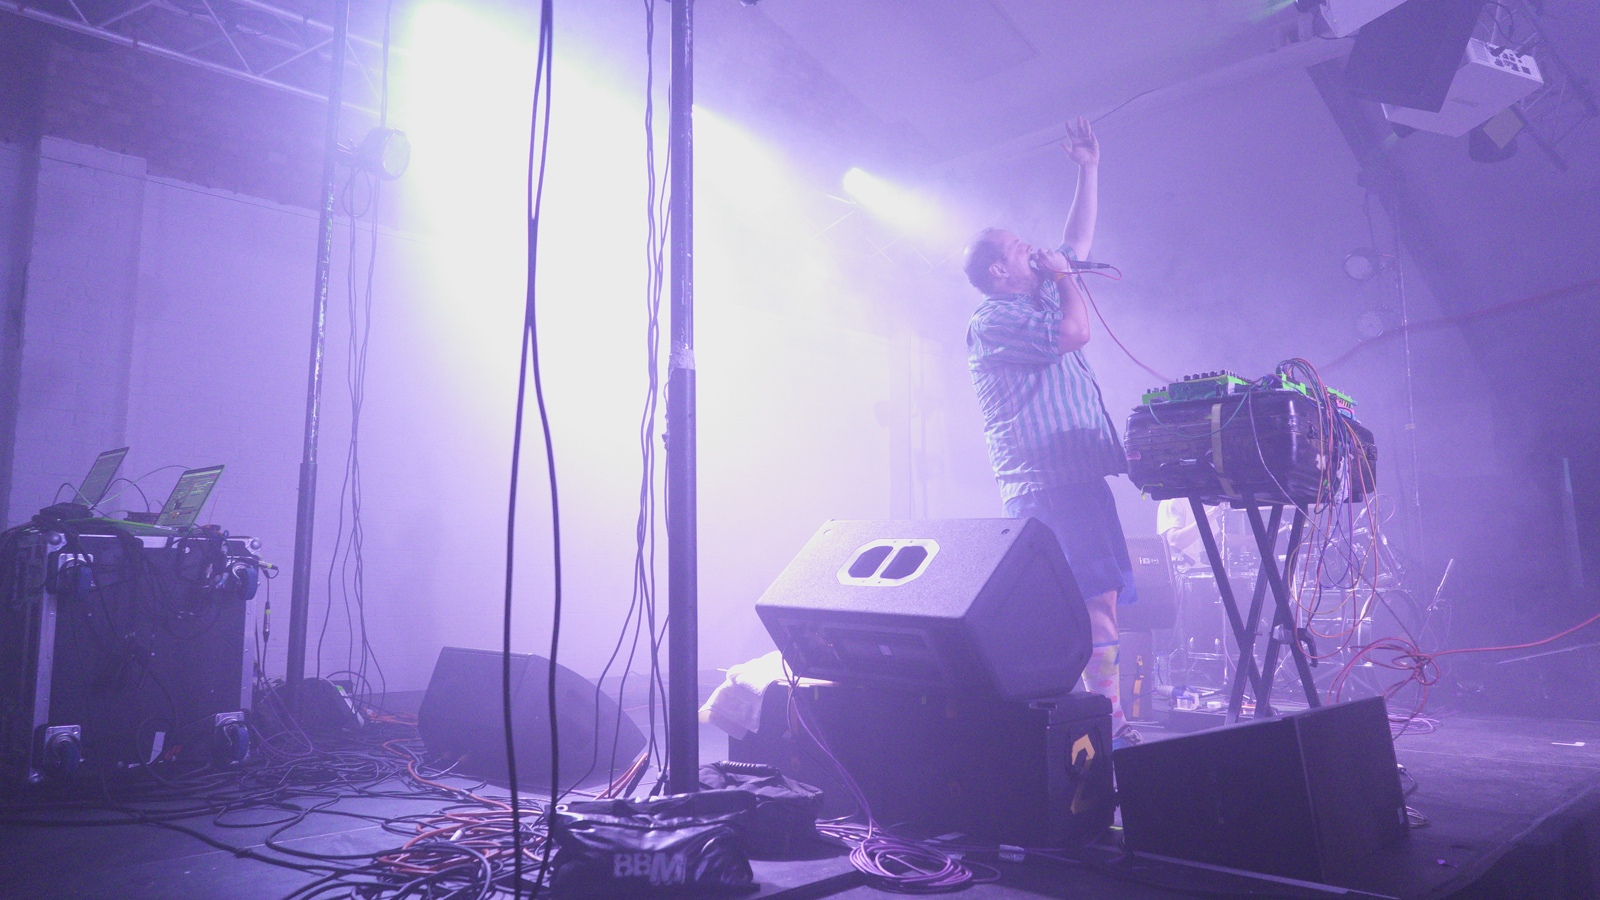 Dan Deacon live at The Oval Space. Photography: Carys Huws